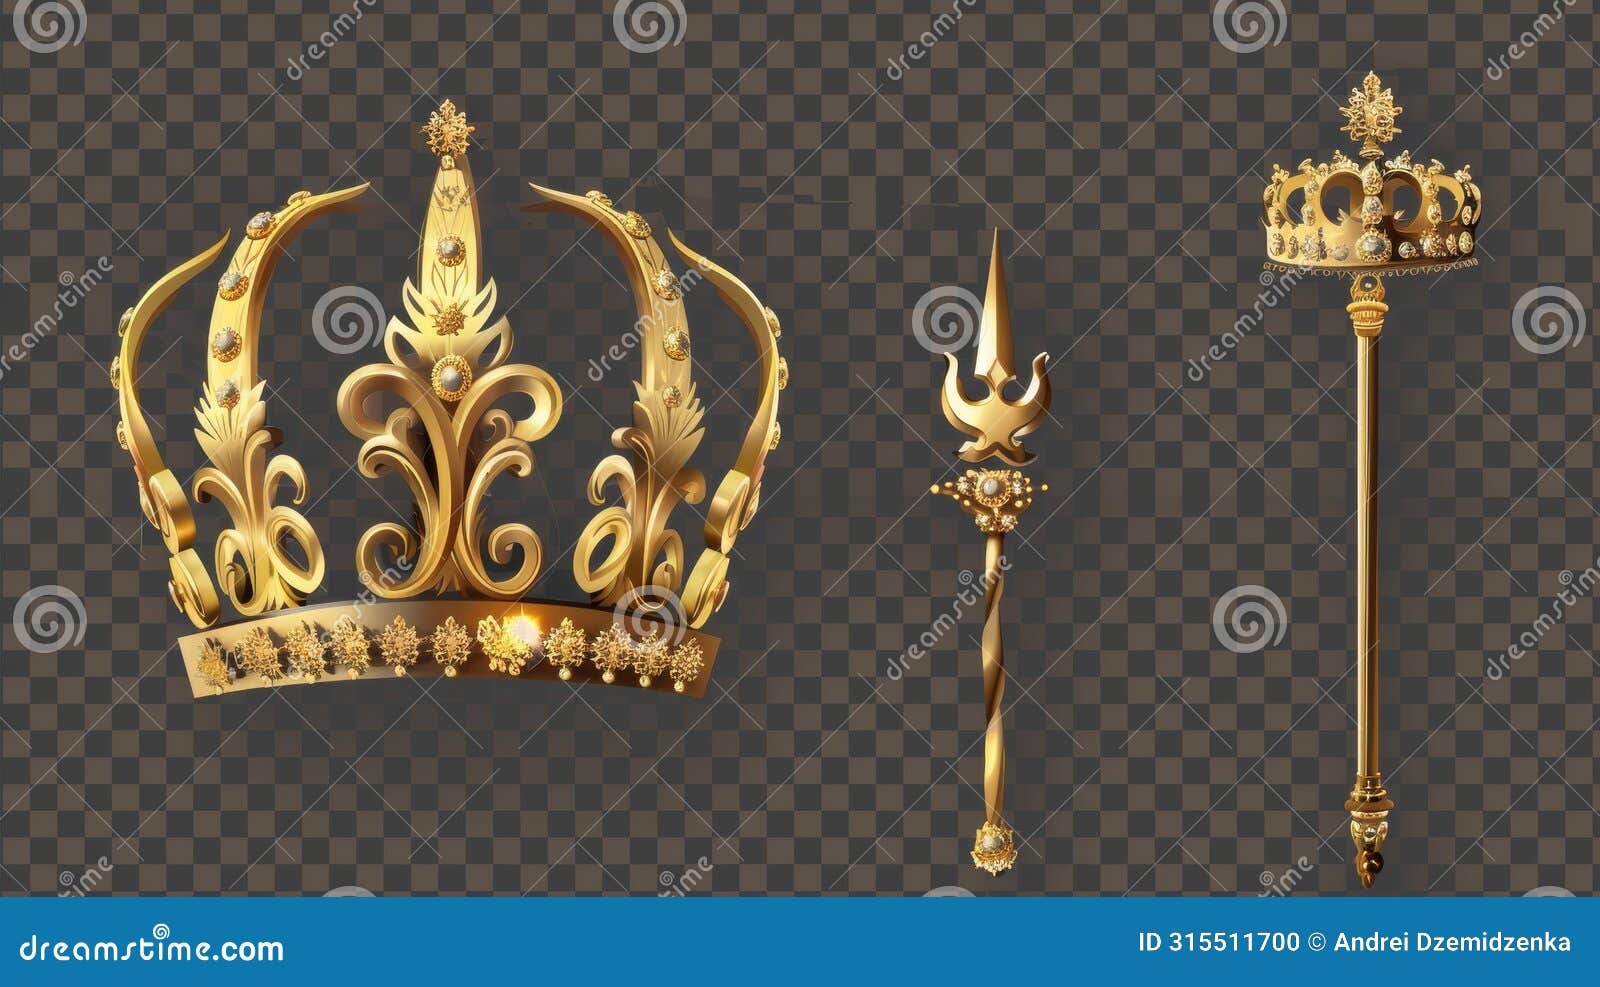 modern realistic golden crown and sceptre for a king or queen. middle ages diadem with monarchy rod for princes